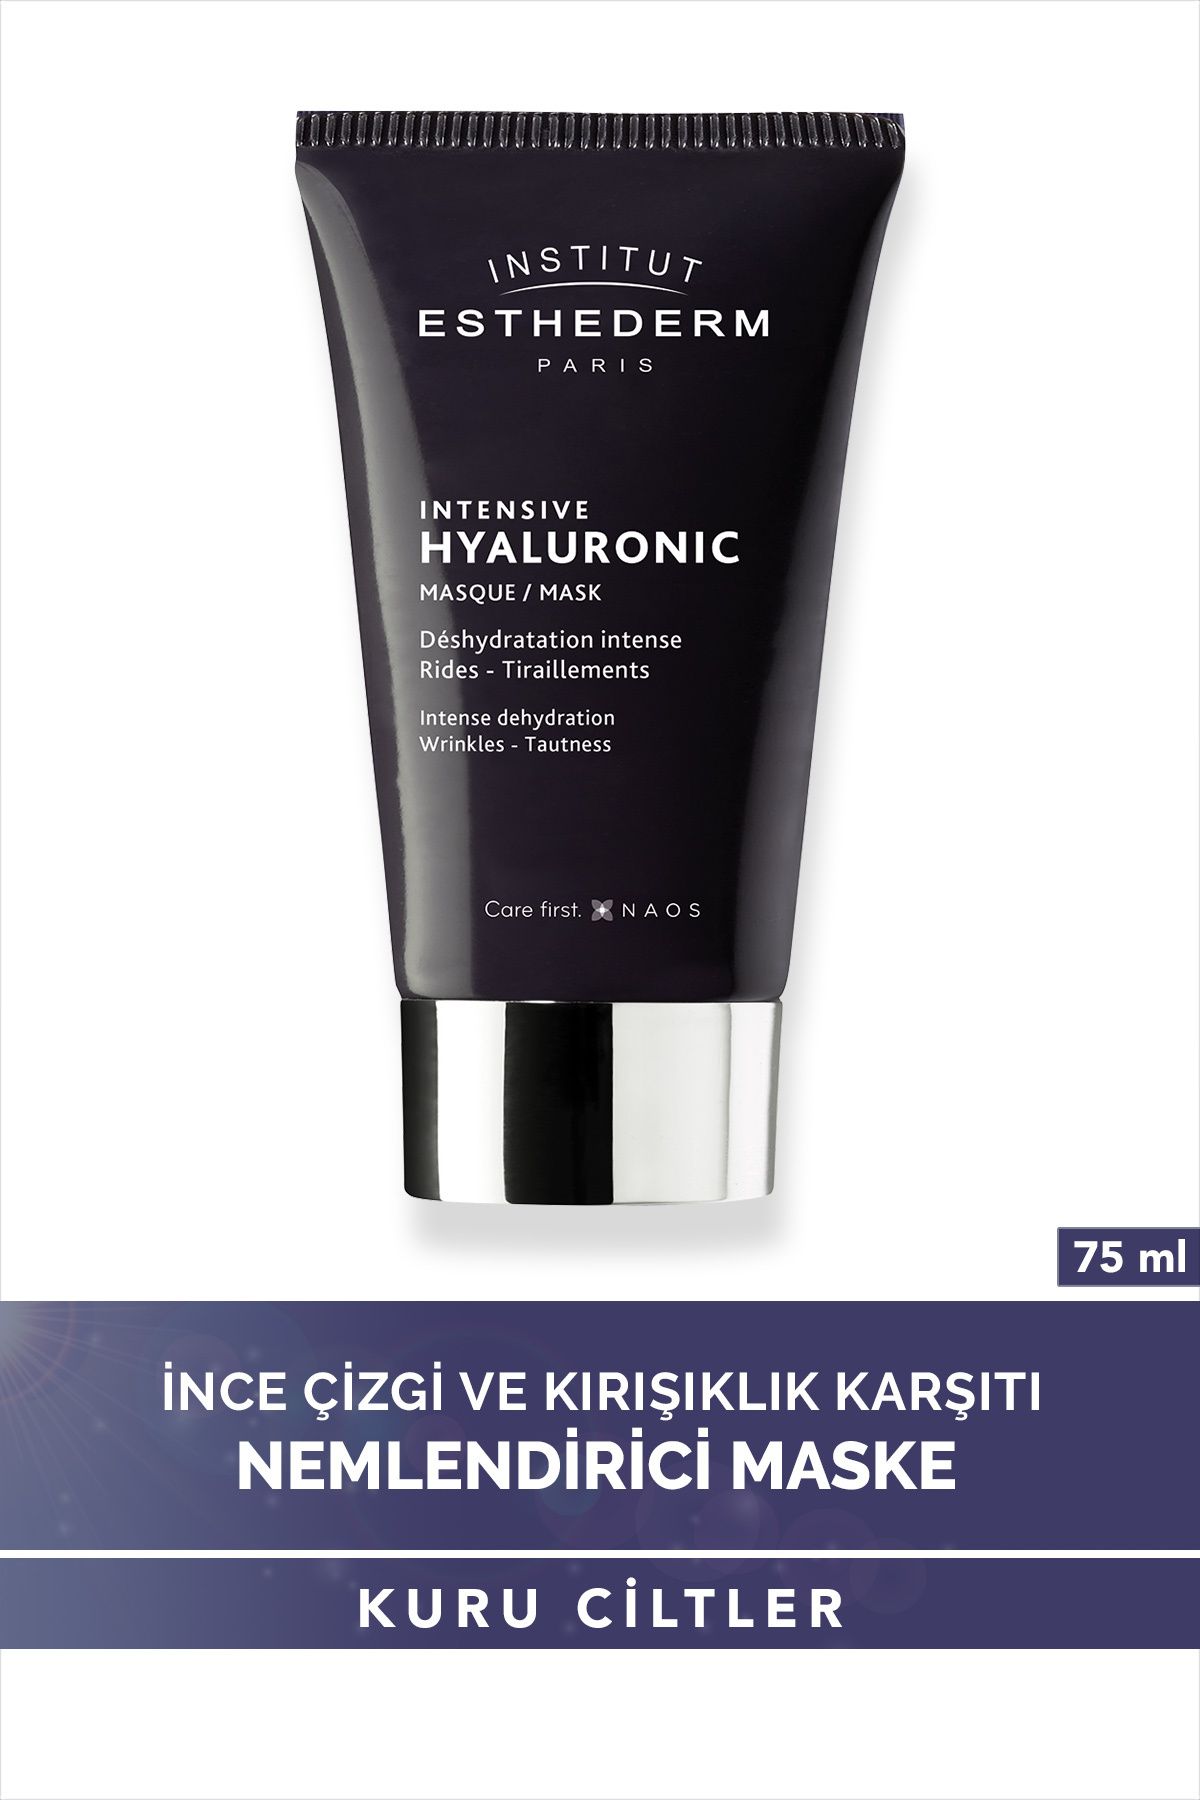 INSTITUT ESTHEDERM PERFECT SKİN - MASK AGAINST STRESS AND WRINKLE PROBLEMS DUE TO DRYNESS 75 ML